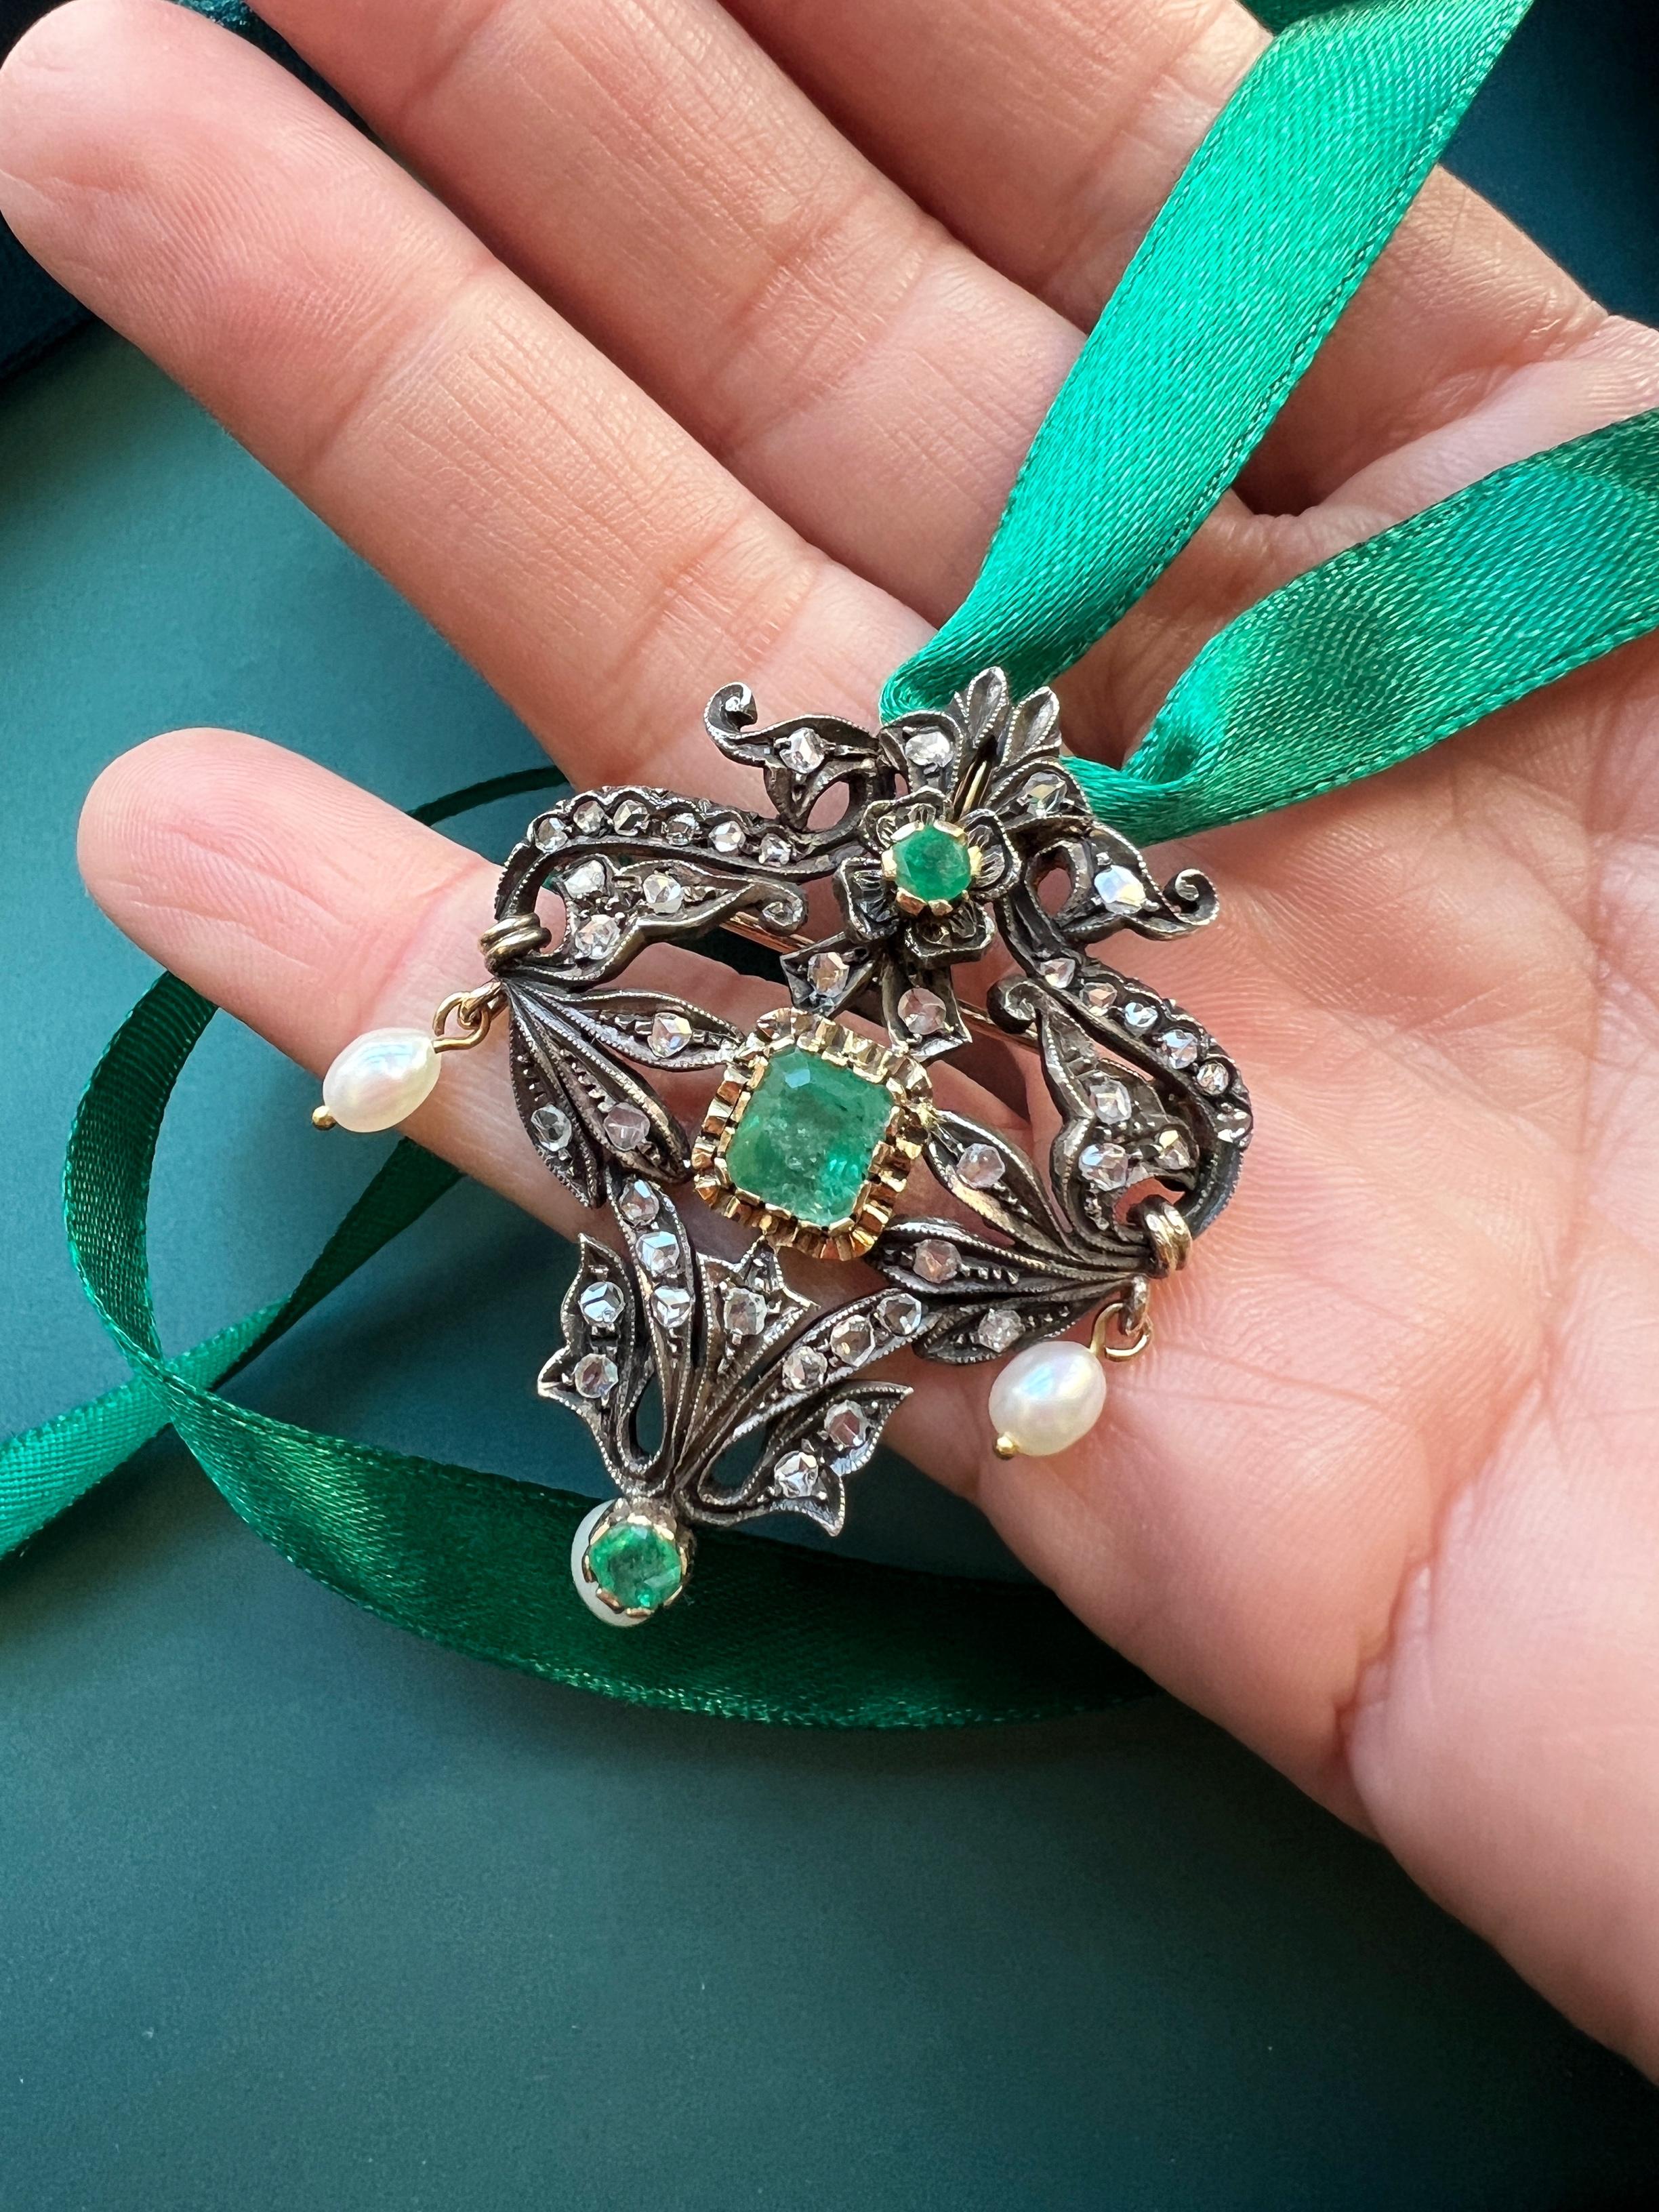 People have admired emerald’s green for thousands of years. There are other green gems, but emerald is the one that’s always associated with the lushest landscapes and the richest greens.

For sale a magnificent pendant brooch, featuring a bouquet